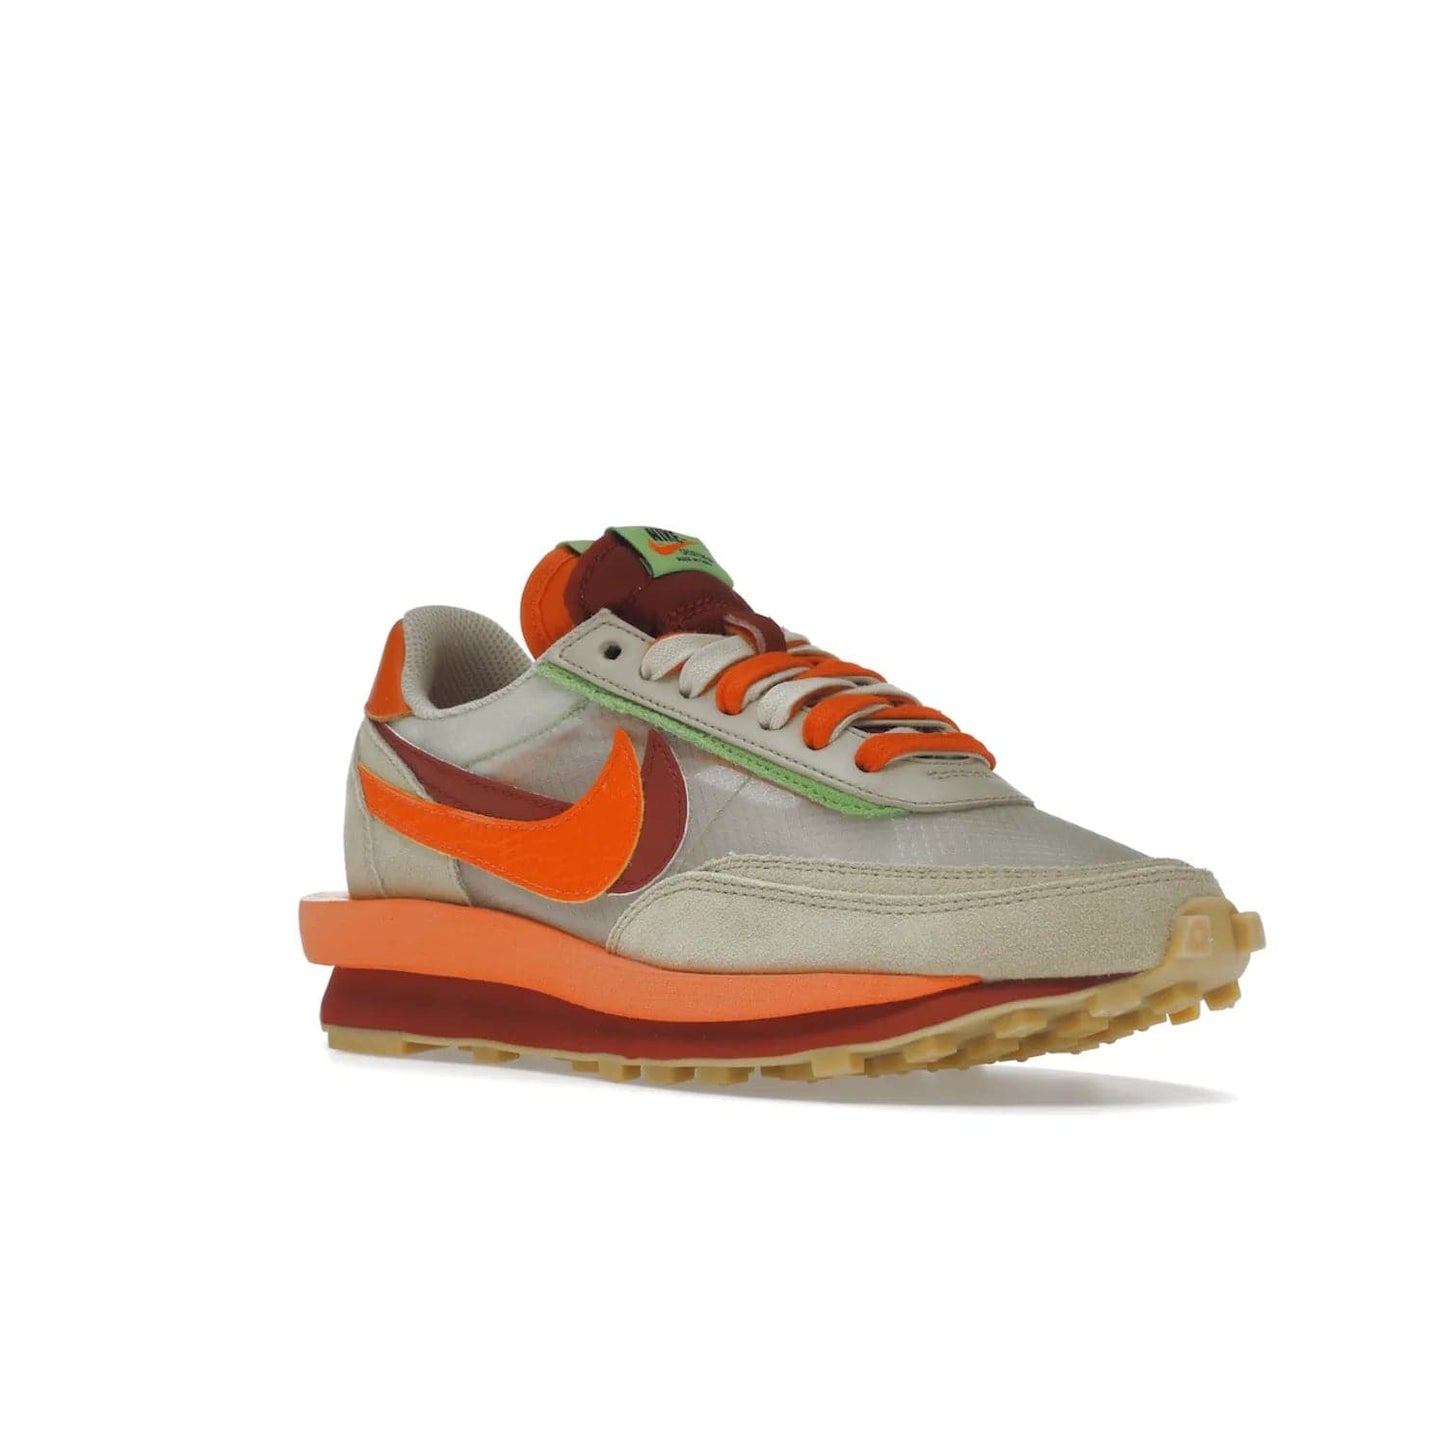 Nike LD Waffle sacai CLOT Kiss of Death Net Orange Blaze - Image 5 - Only at www.BallersClubKickz.com - A bold and stylish Nike LD Waffle sacai CLOT Kiss of Death Net Orange Blaze sneaker featuring a unique off-white, Deep Red & Orange Blaze Swooshes, two-toned stacked sole and doubled tongue. Available in September 2021. Make a statement.